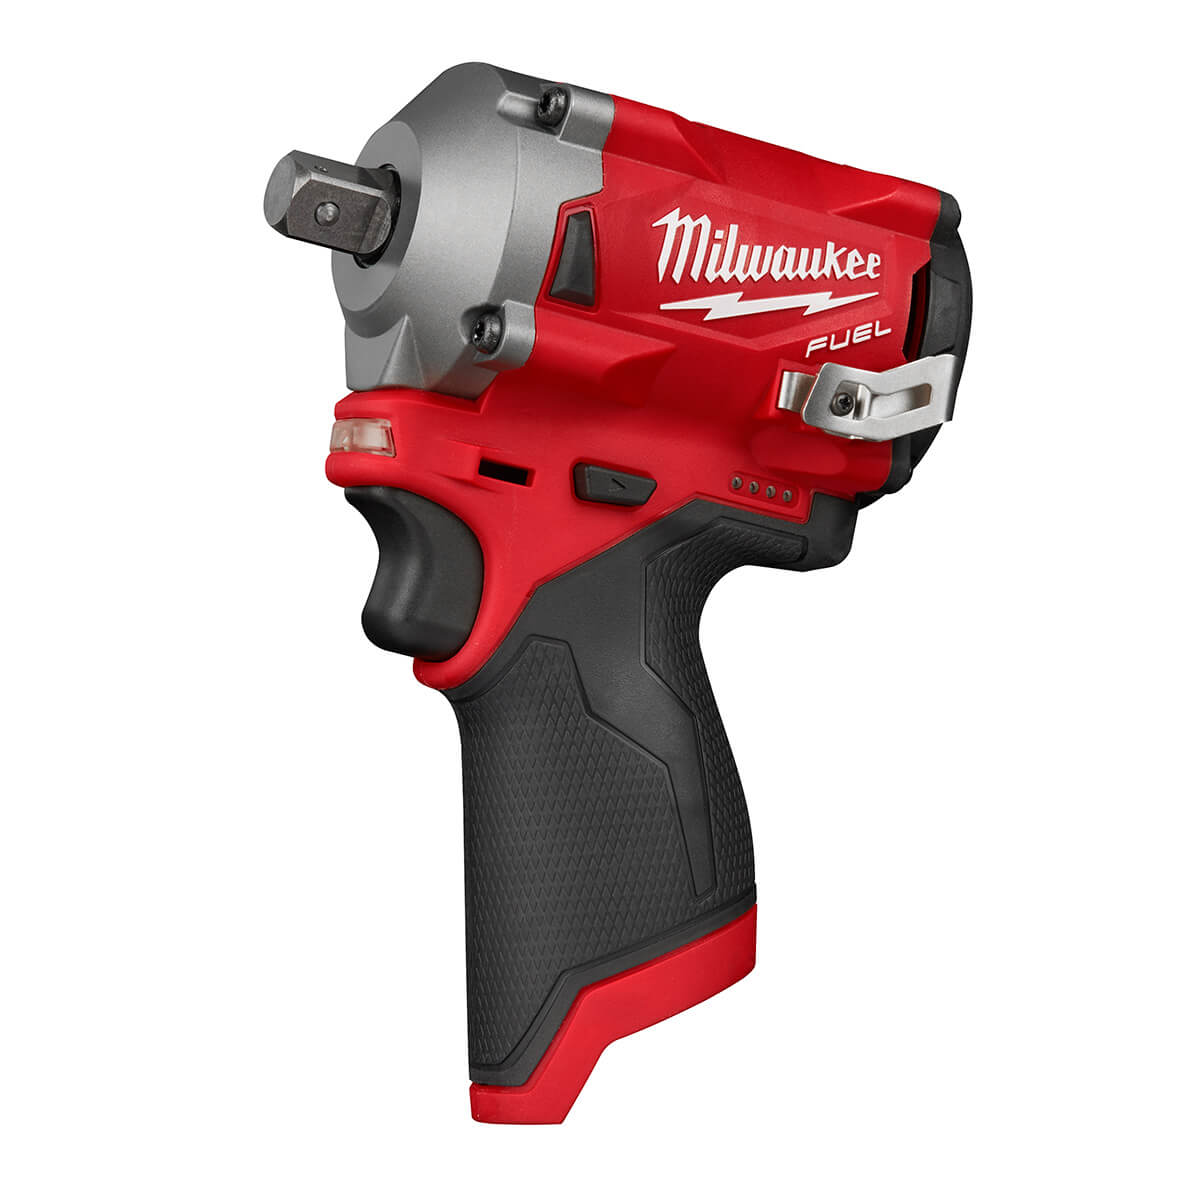 Milwaukee 2555-20 - M12 FUEL Stubby 1/2" Impact Wrench - wise-line-tools